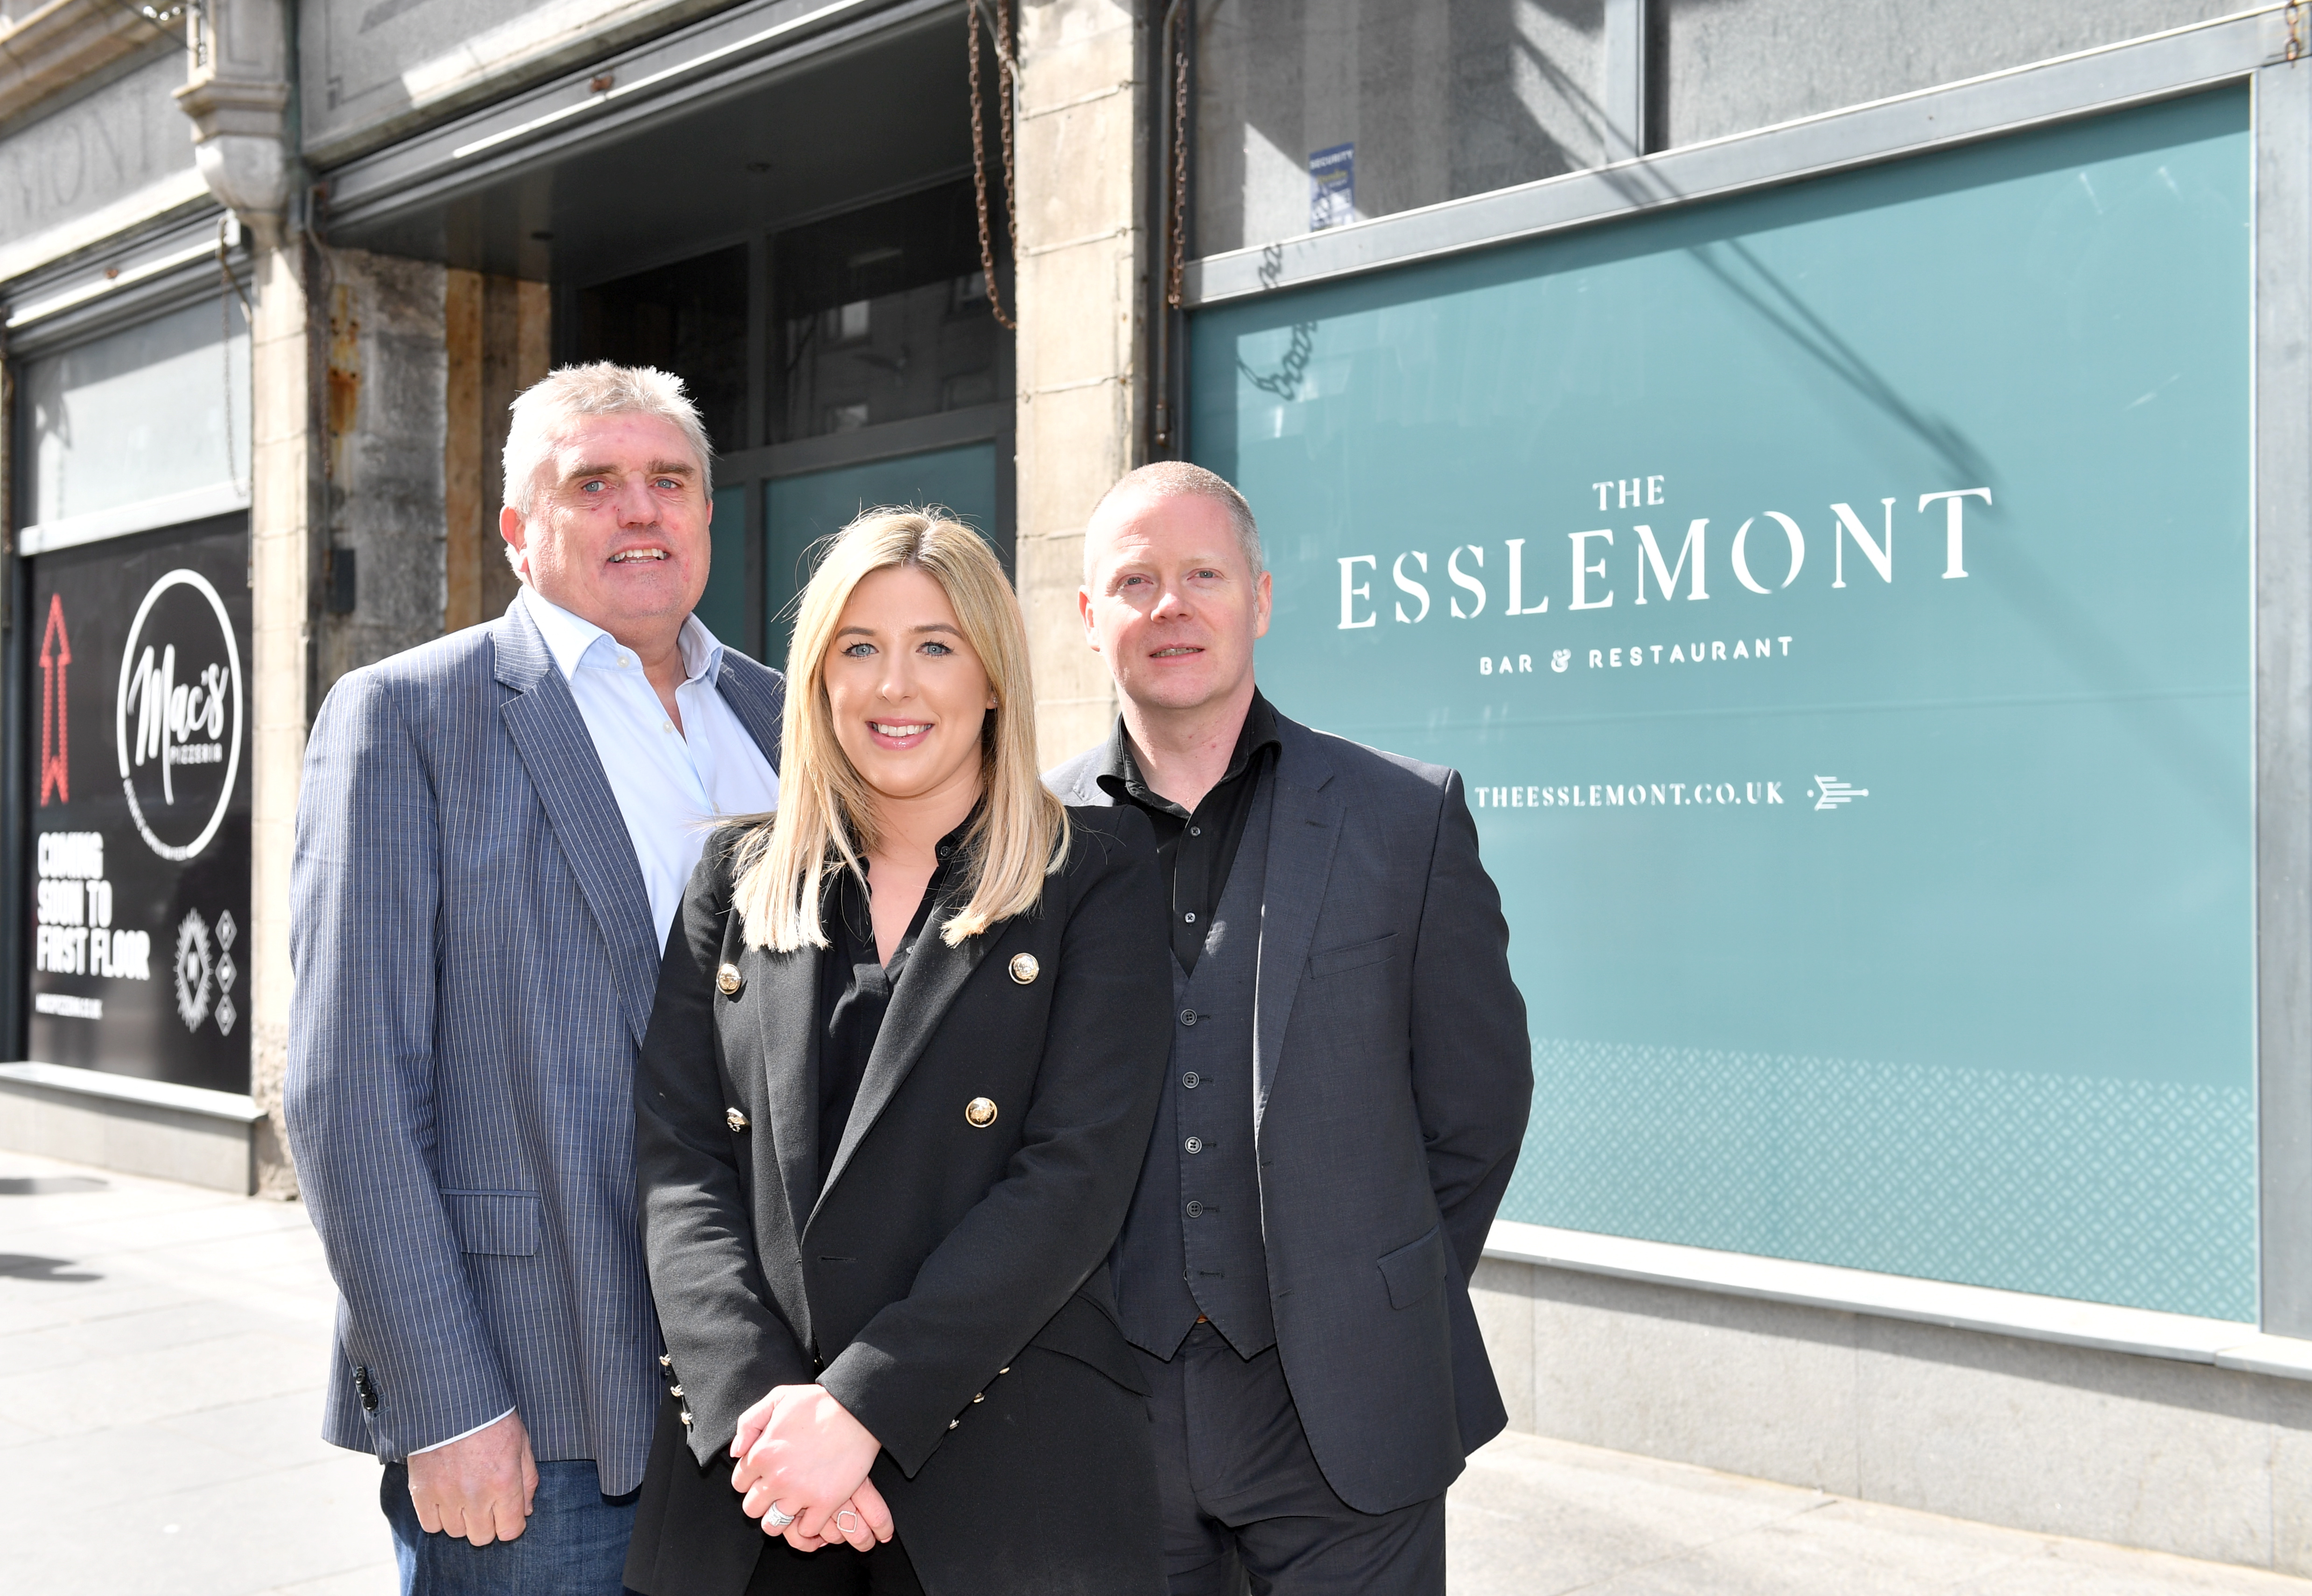 Pictured - Allan Henderson, Jillian Miller and Alan Aitken of McGinty's at the site.    
    
Picture by Kami Thomson